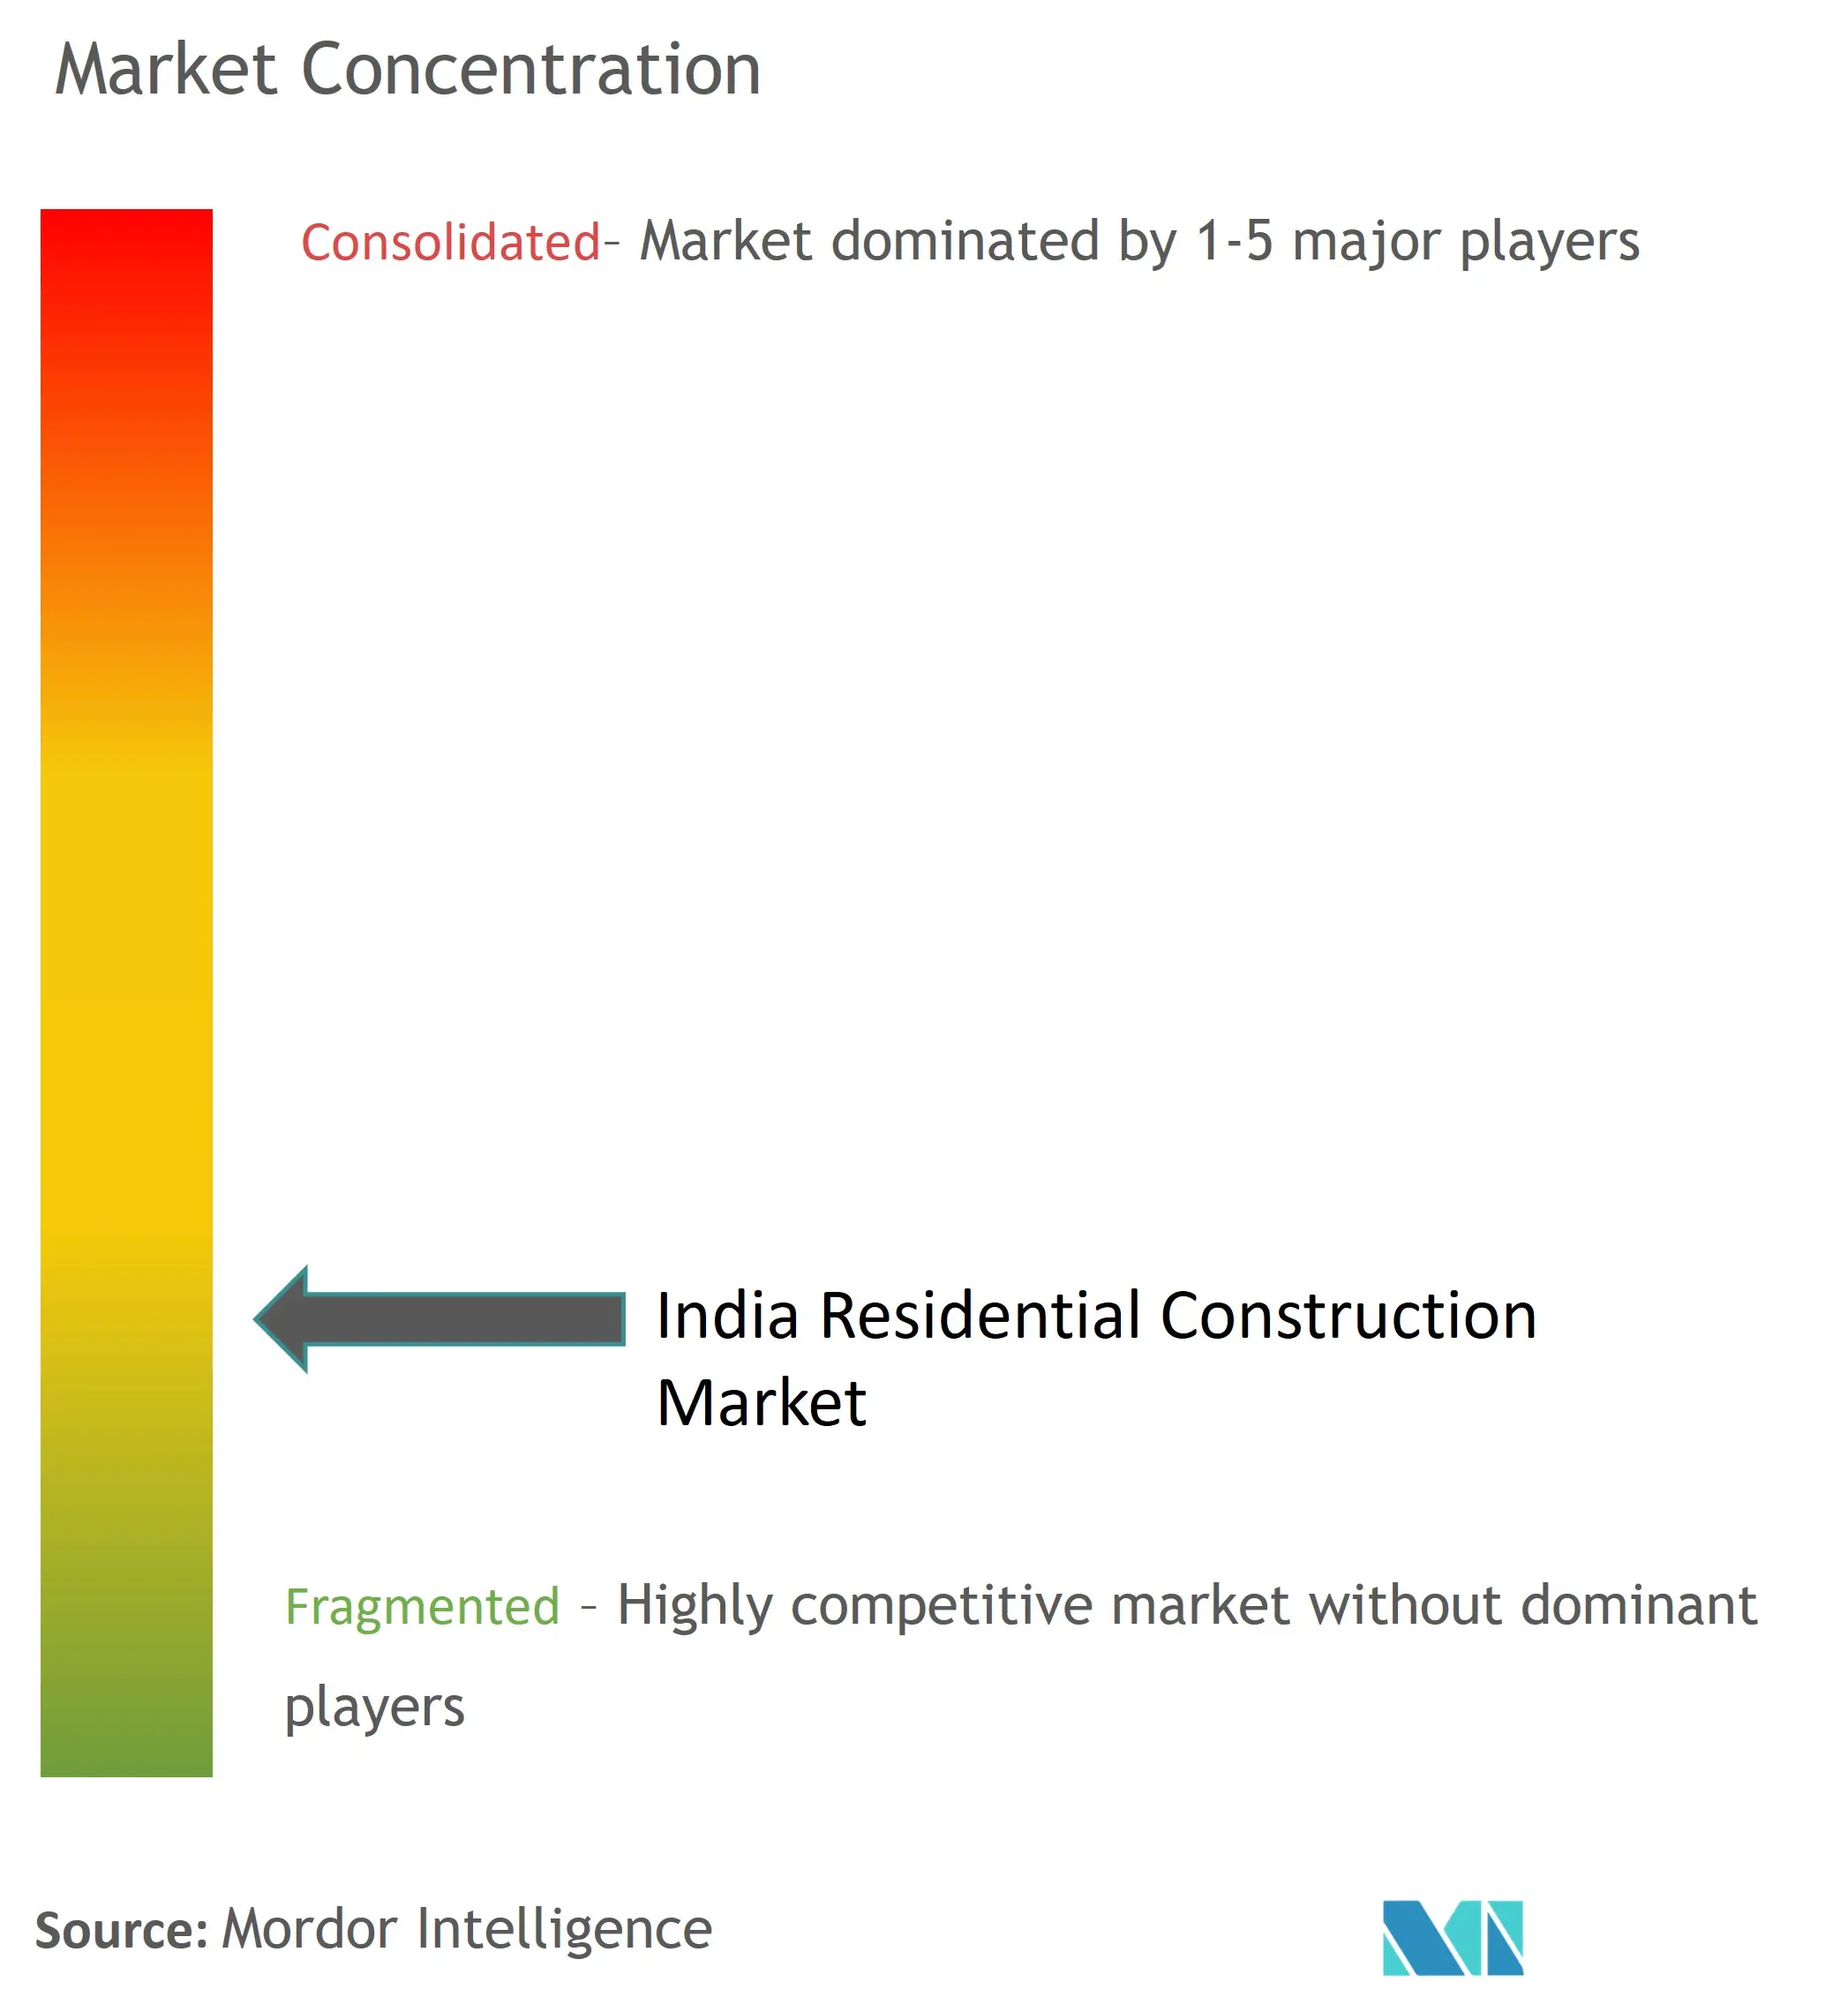 India Residential Construction Market Concentration